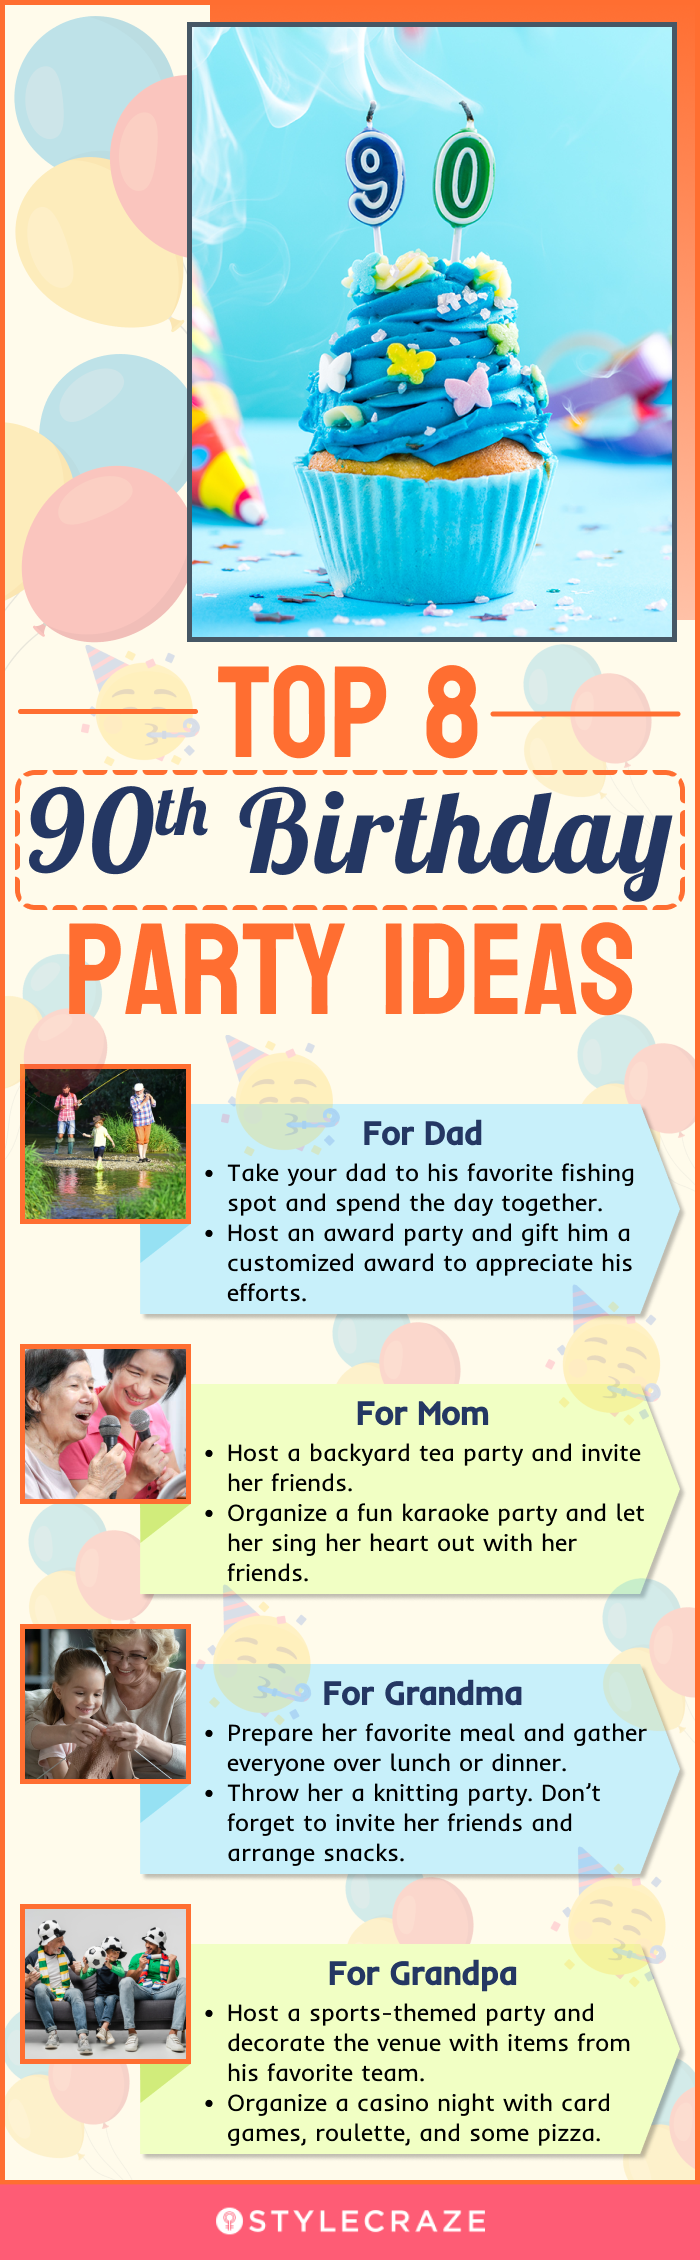 top 8 90th birthday party ideas (infographic)